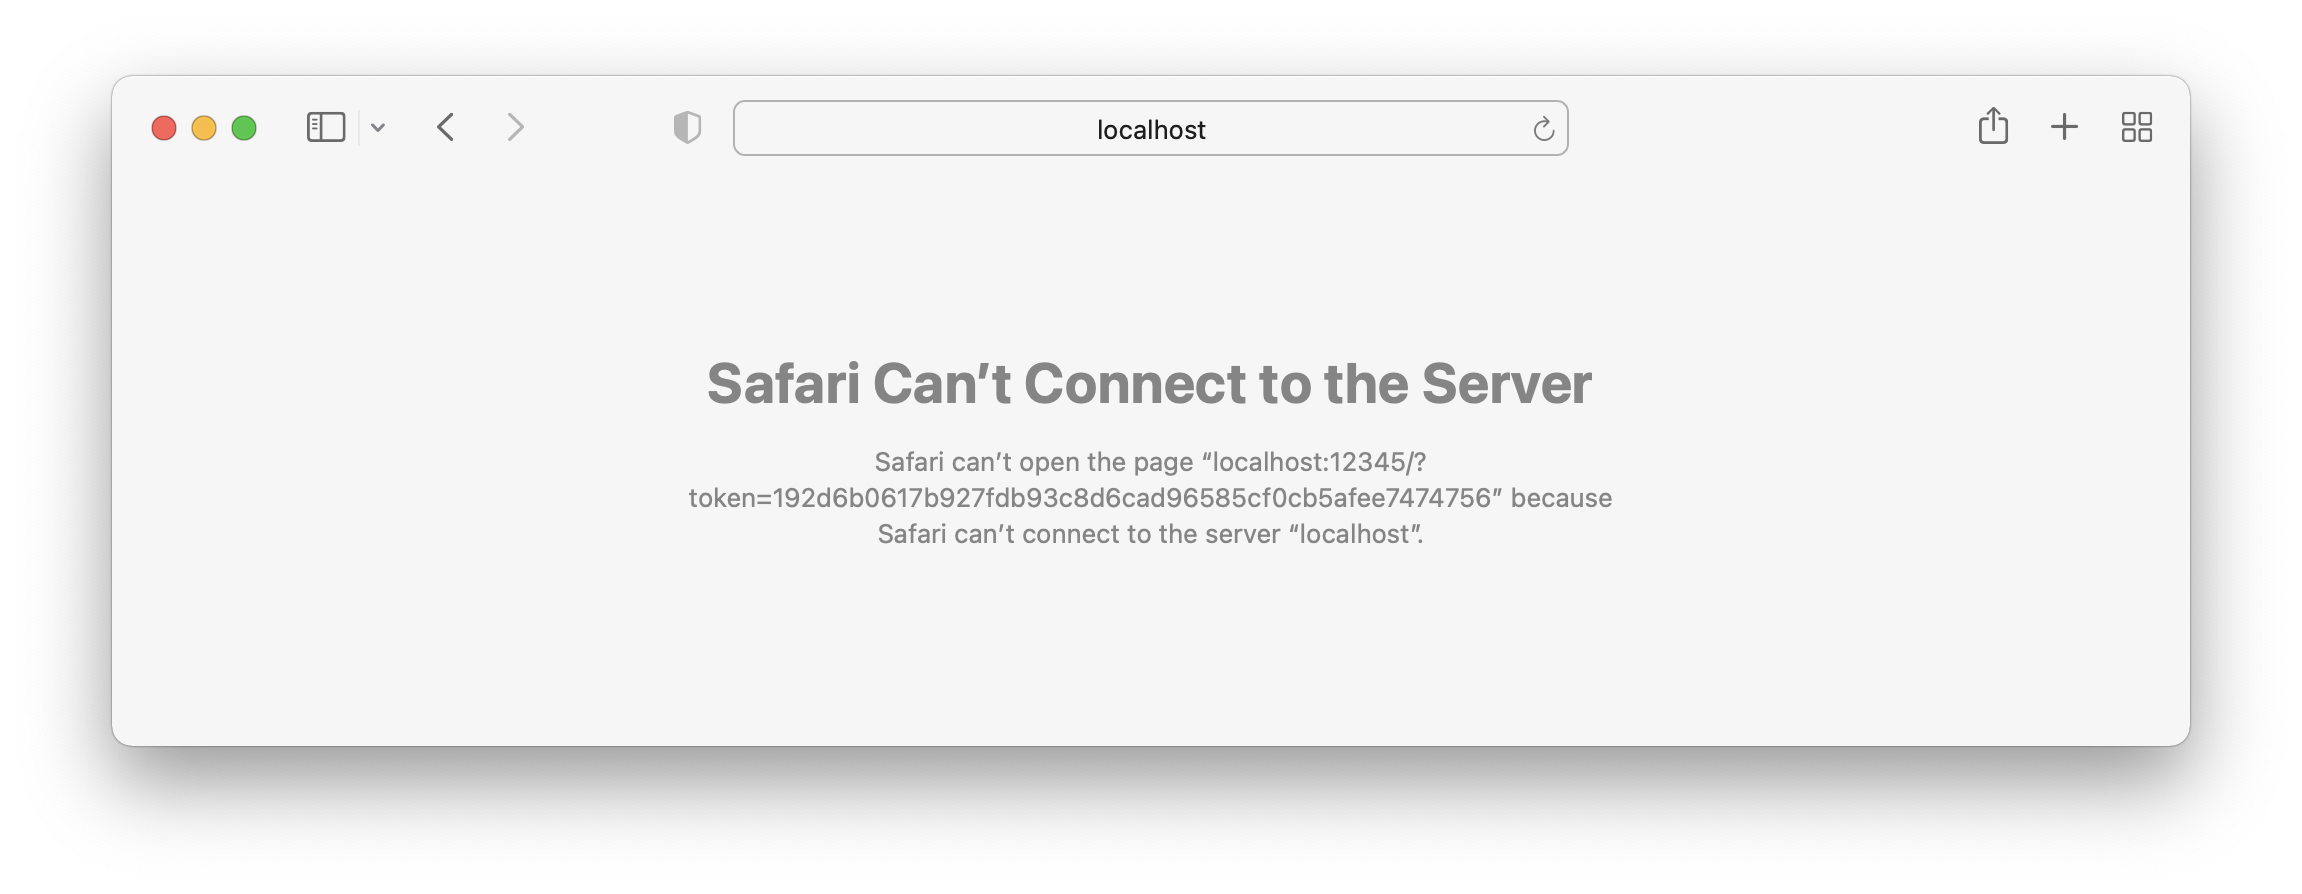 Can't connect to server